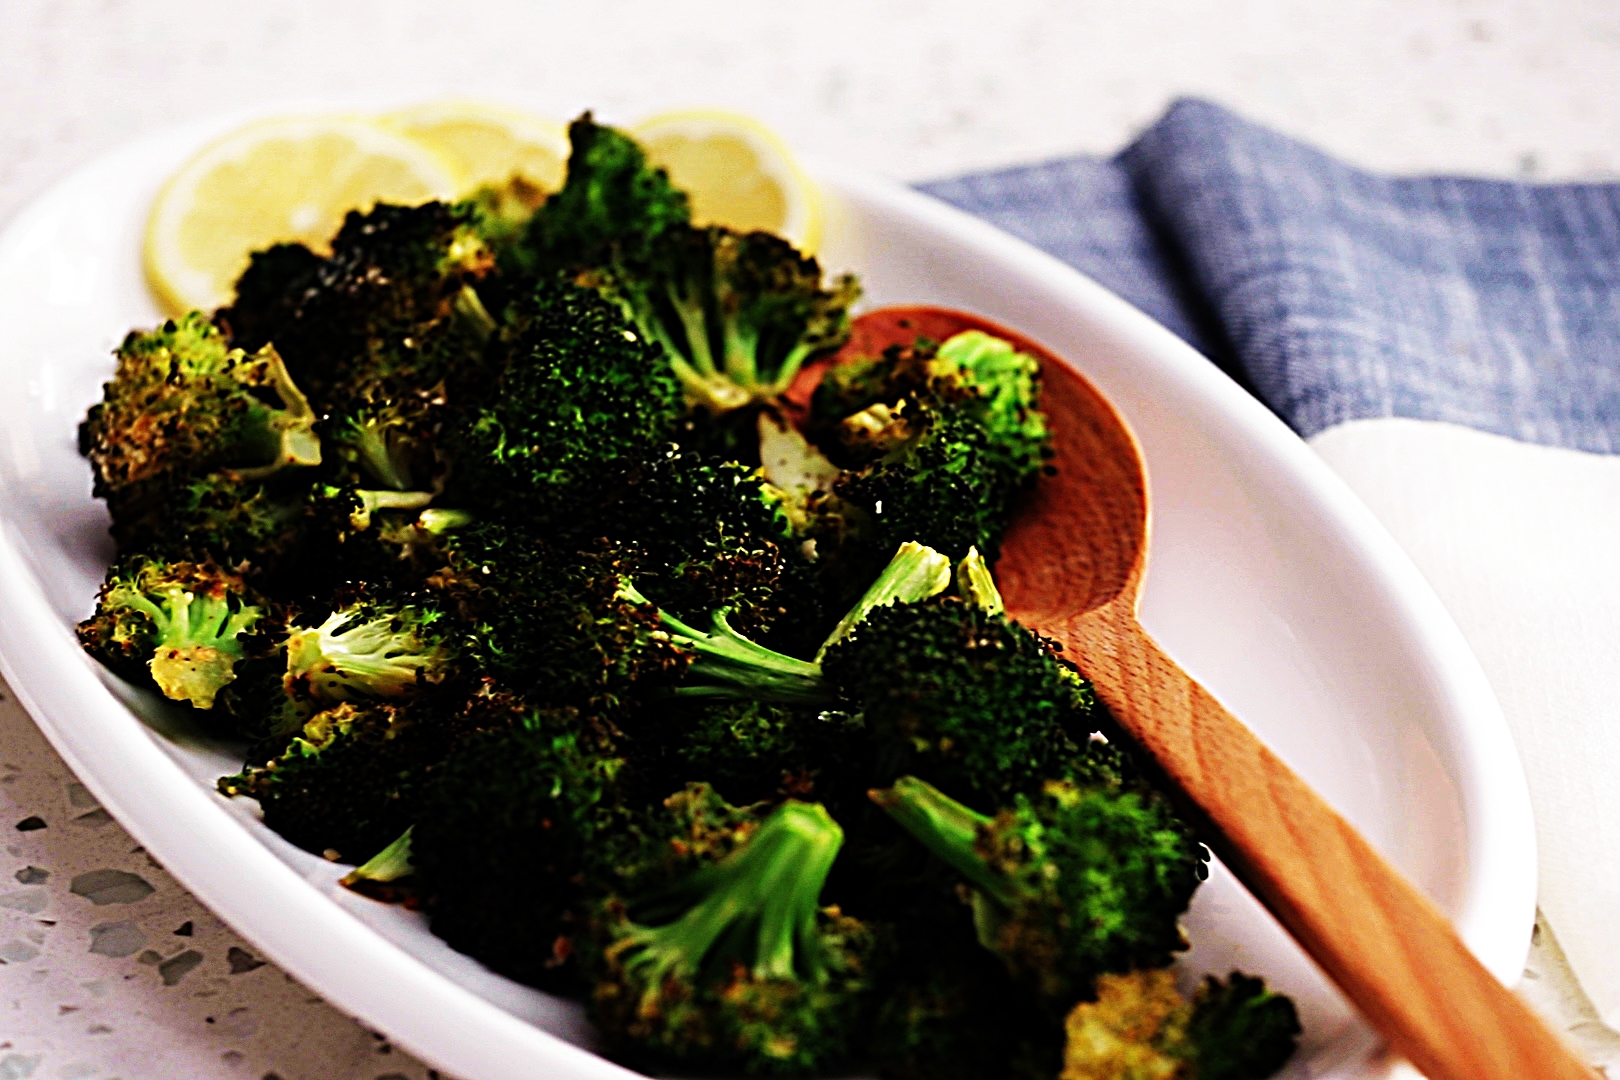 Stupid-Easy Recipe for Lemon Parmesan Roasted Broccoli (#1 Top-Rated)